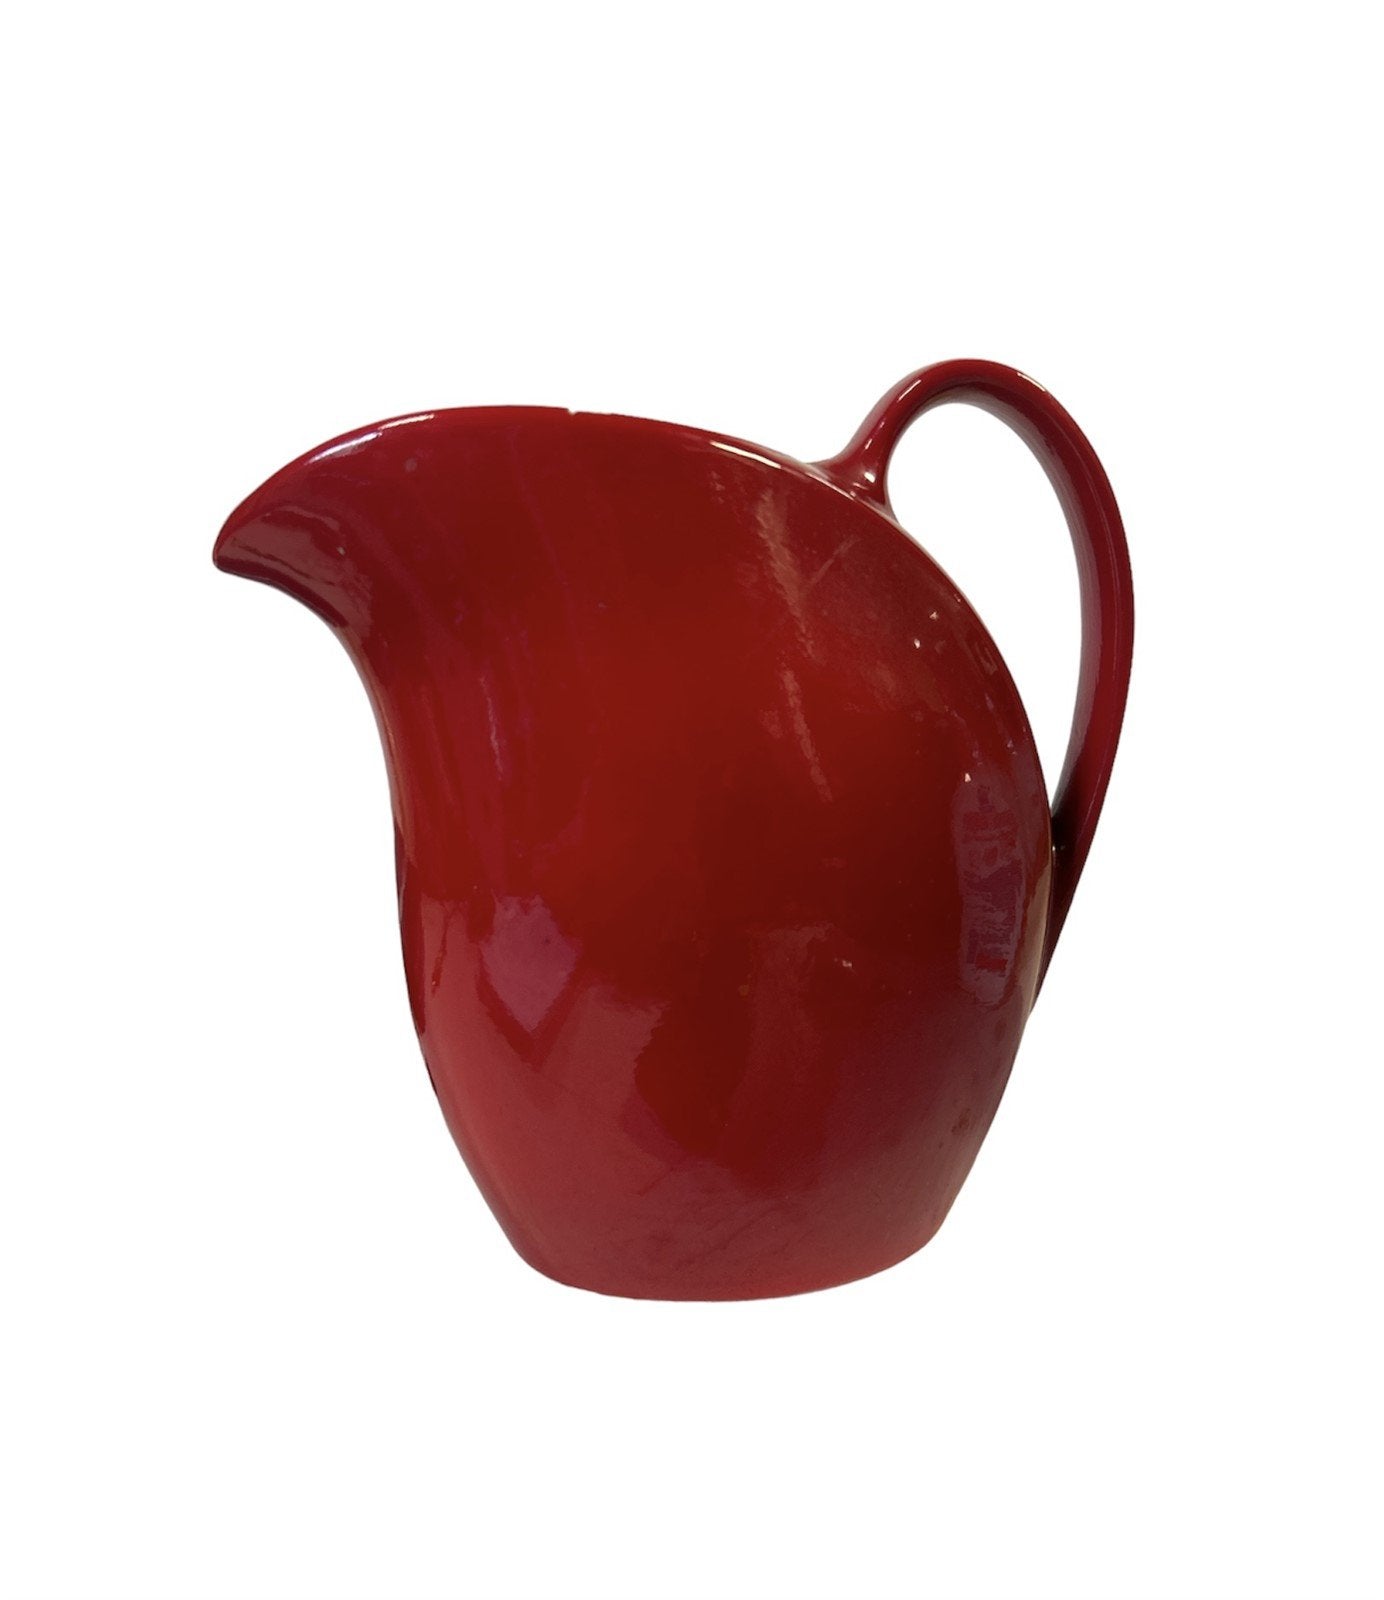 Rose Red Hall China Ceramic Vintage U.S.A made Pitcher for Home and Living